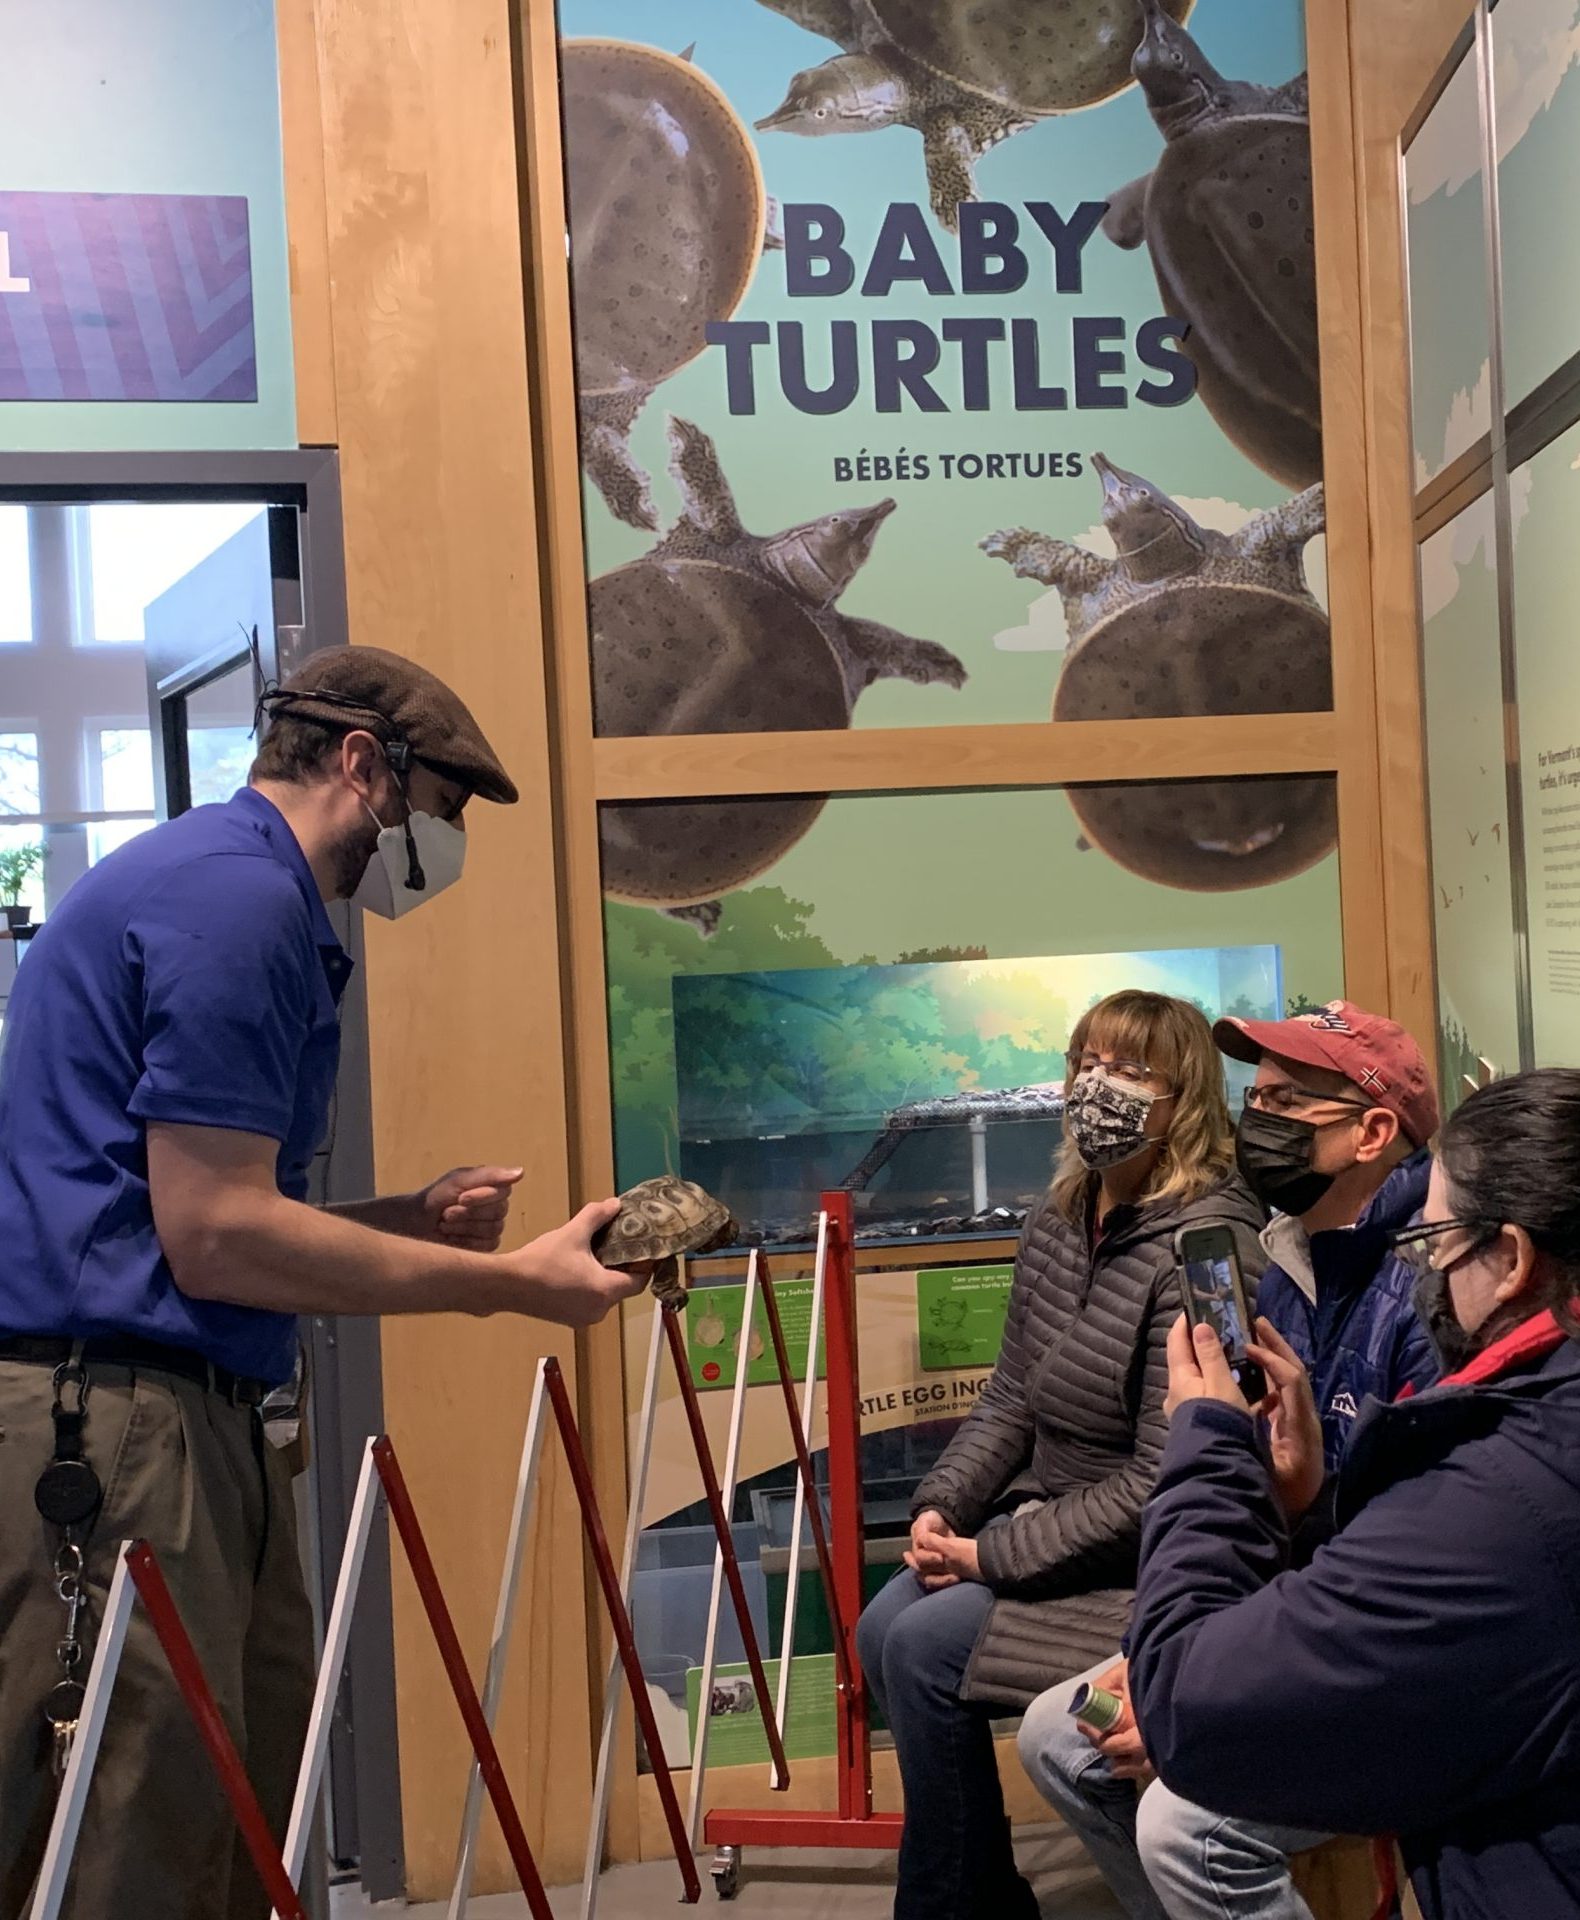 Photograph of ECHO Animal Care staff with blue shirt showing a turtle to a group of visitors.